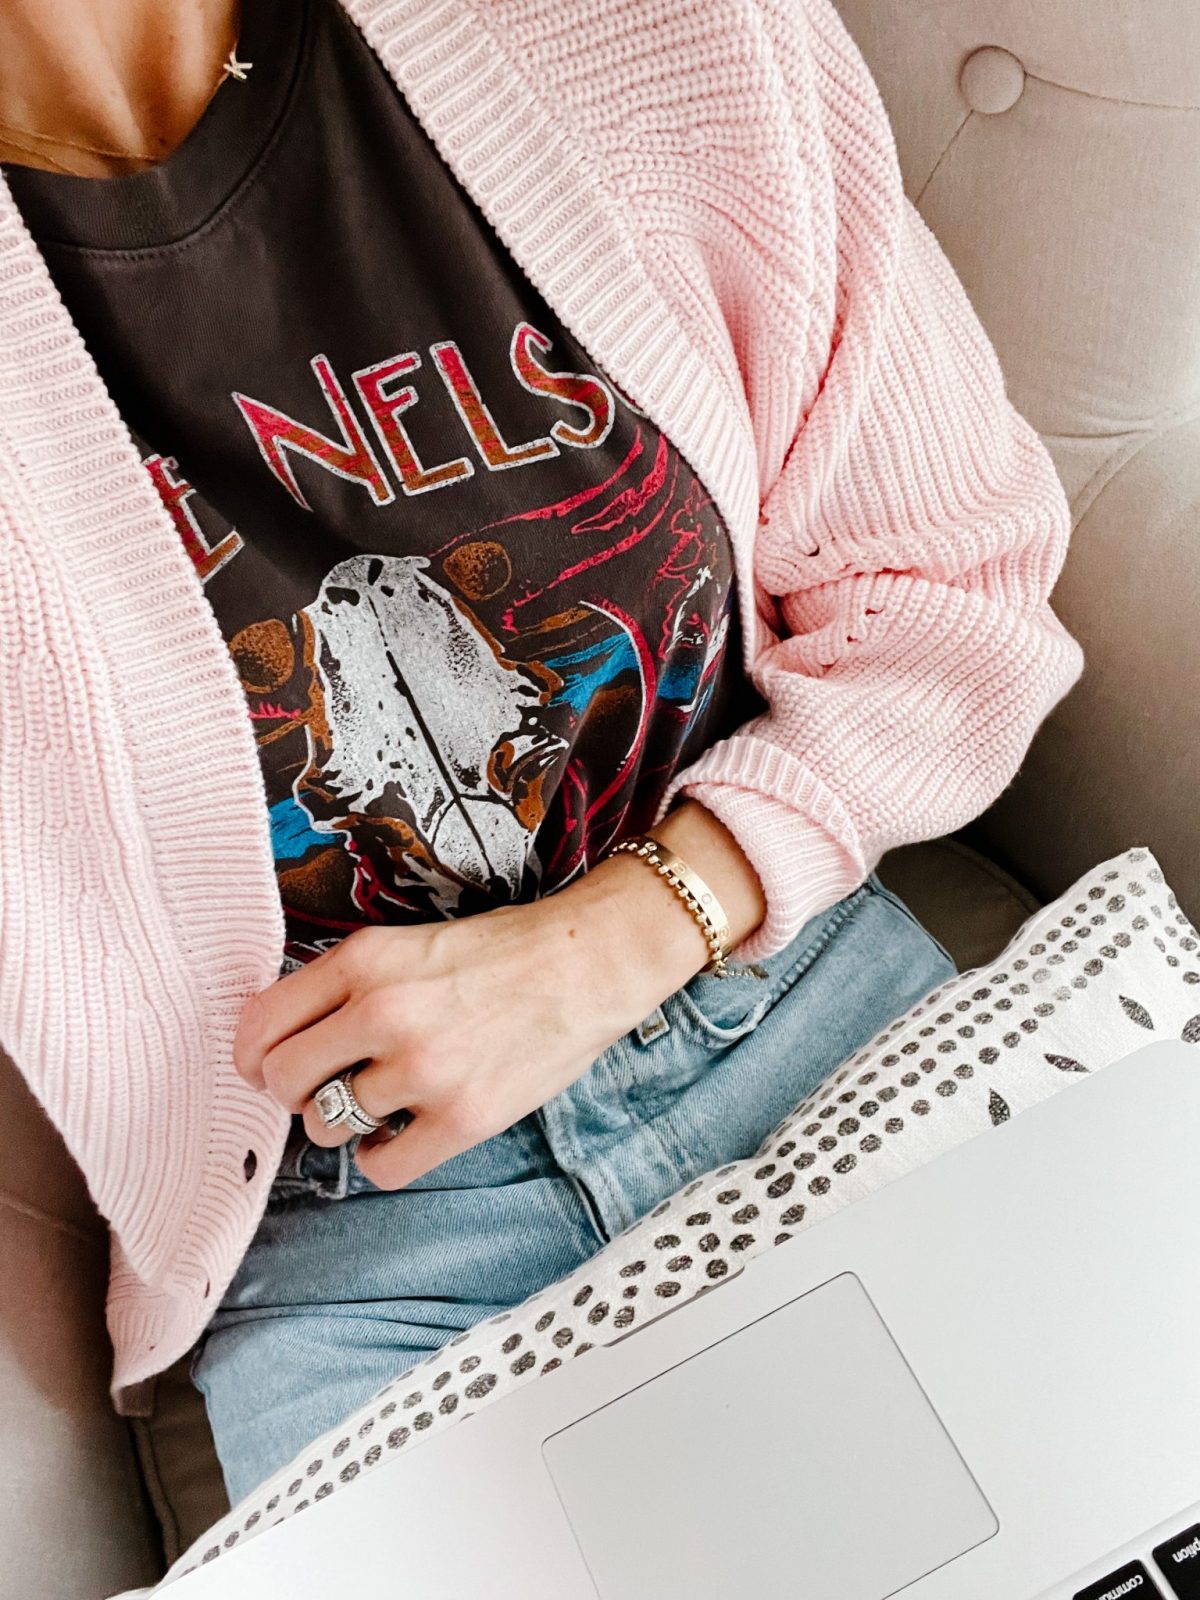 Suzanne working from home wearing a band graphic-t, a pink cardigan,, and mom jeans